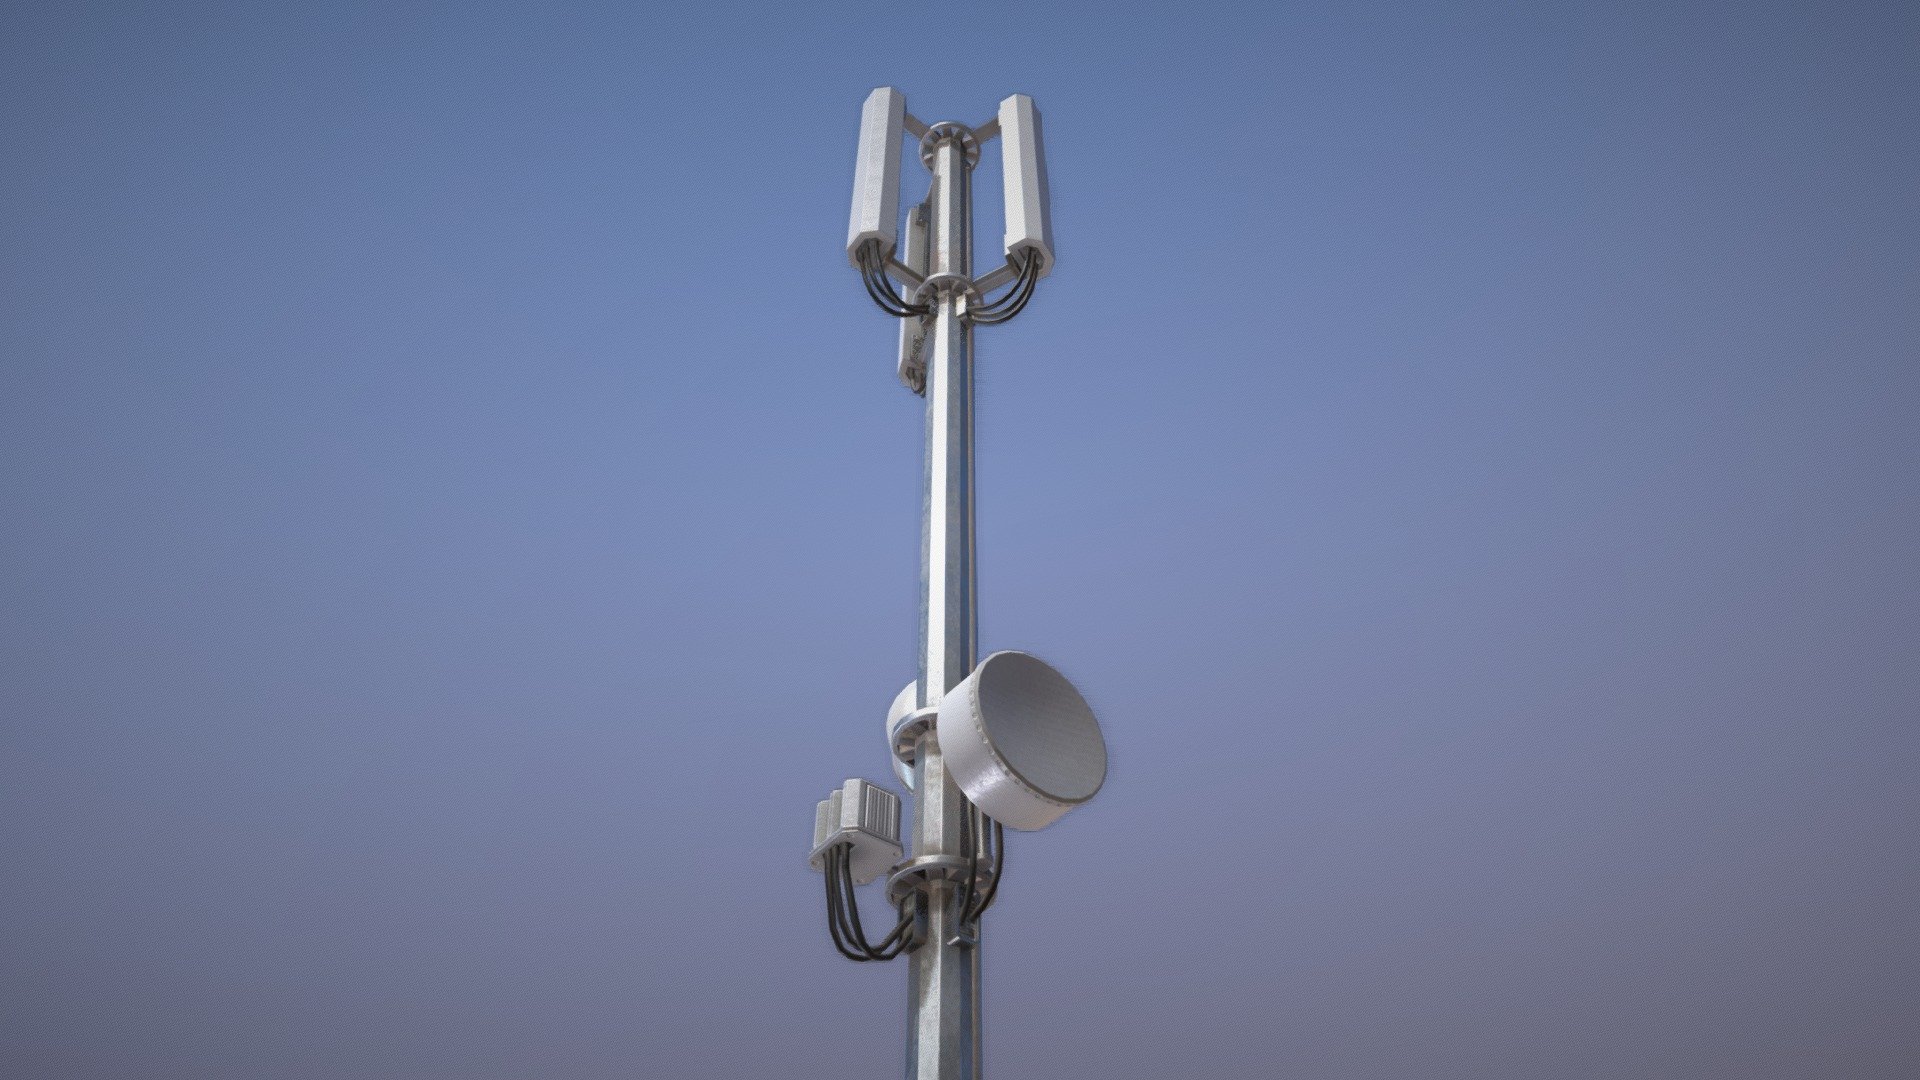 This is the latest asset for Stay Hydrated, a story-driven casual survival VR game I'm making with a small team of three people. Stay Hydrated was started as an Oculus Launchpad 2018 entry. This cell tower is part of a game dynamic that centers around maintaining a cell signal on the player's phone to continue storyline interaction with a 911 operator 3d model